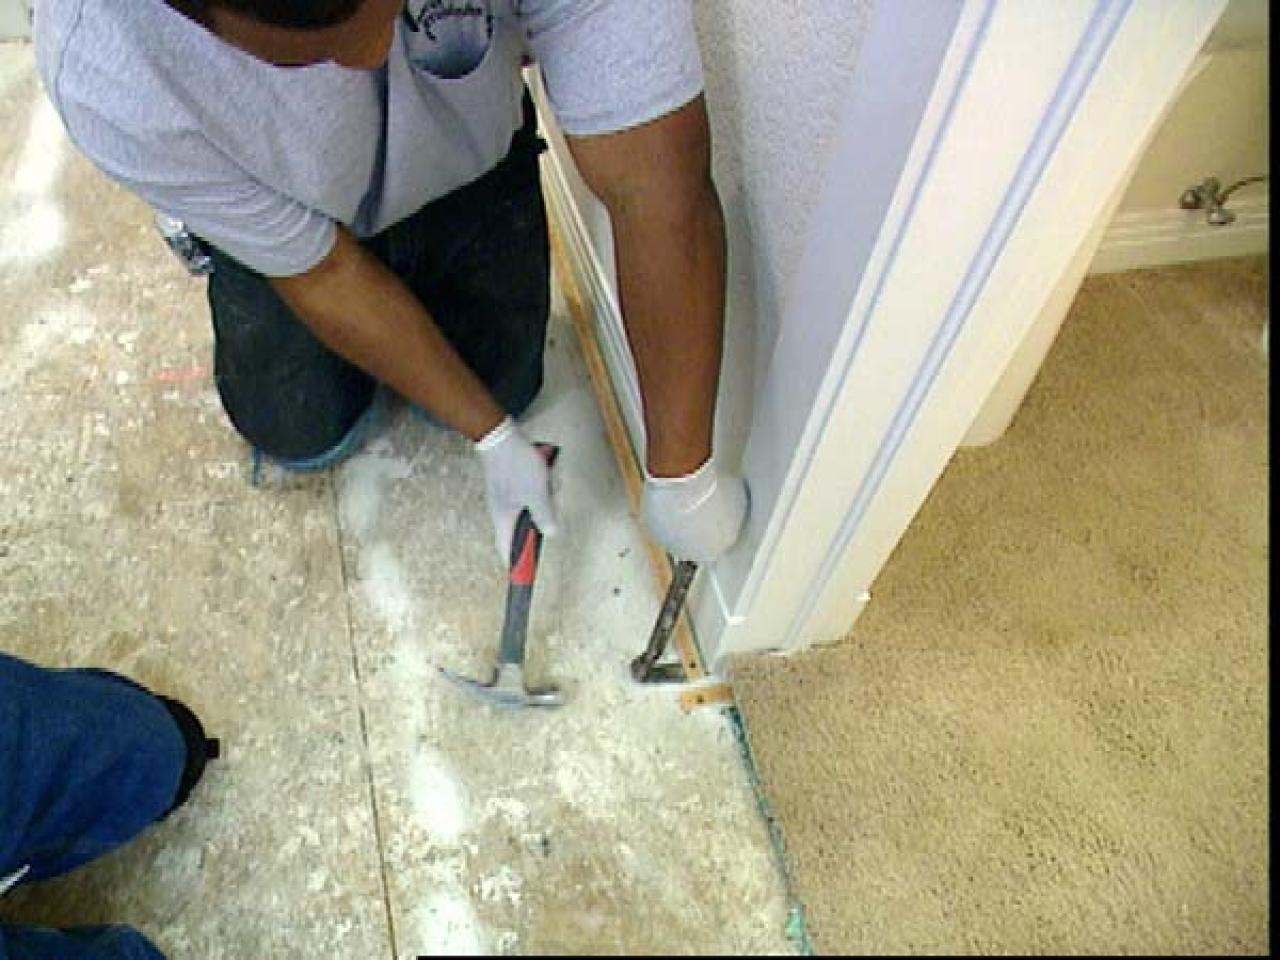 How To Install Tile Flooring Tos, How To Replace Tile Floor